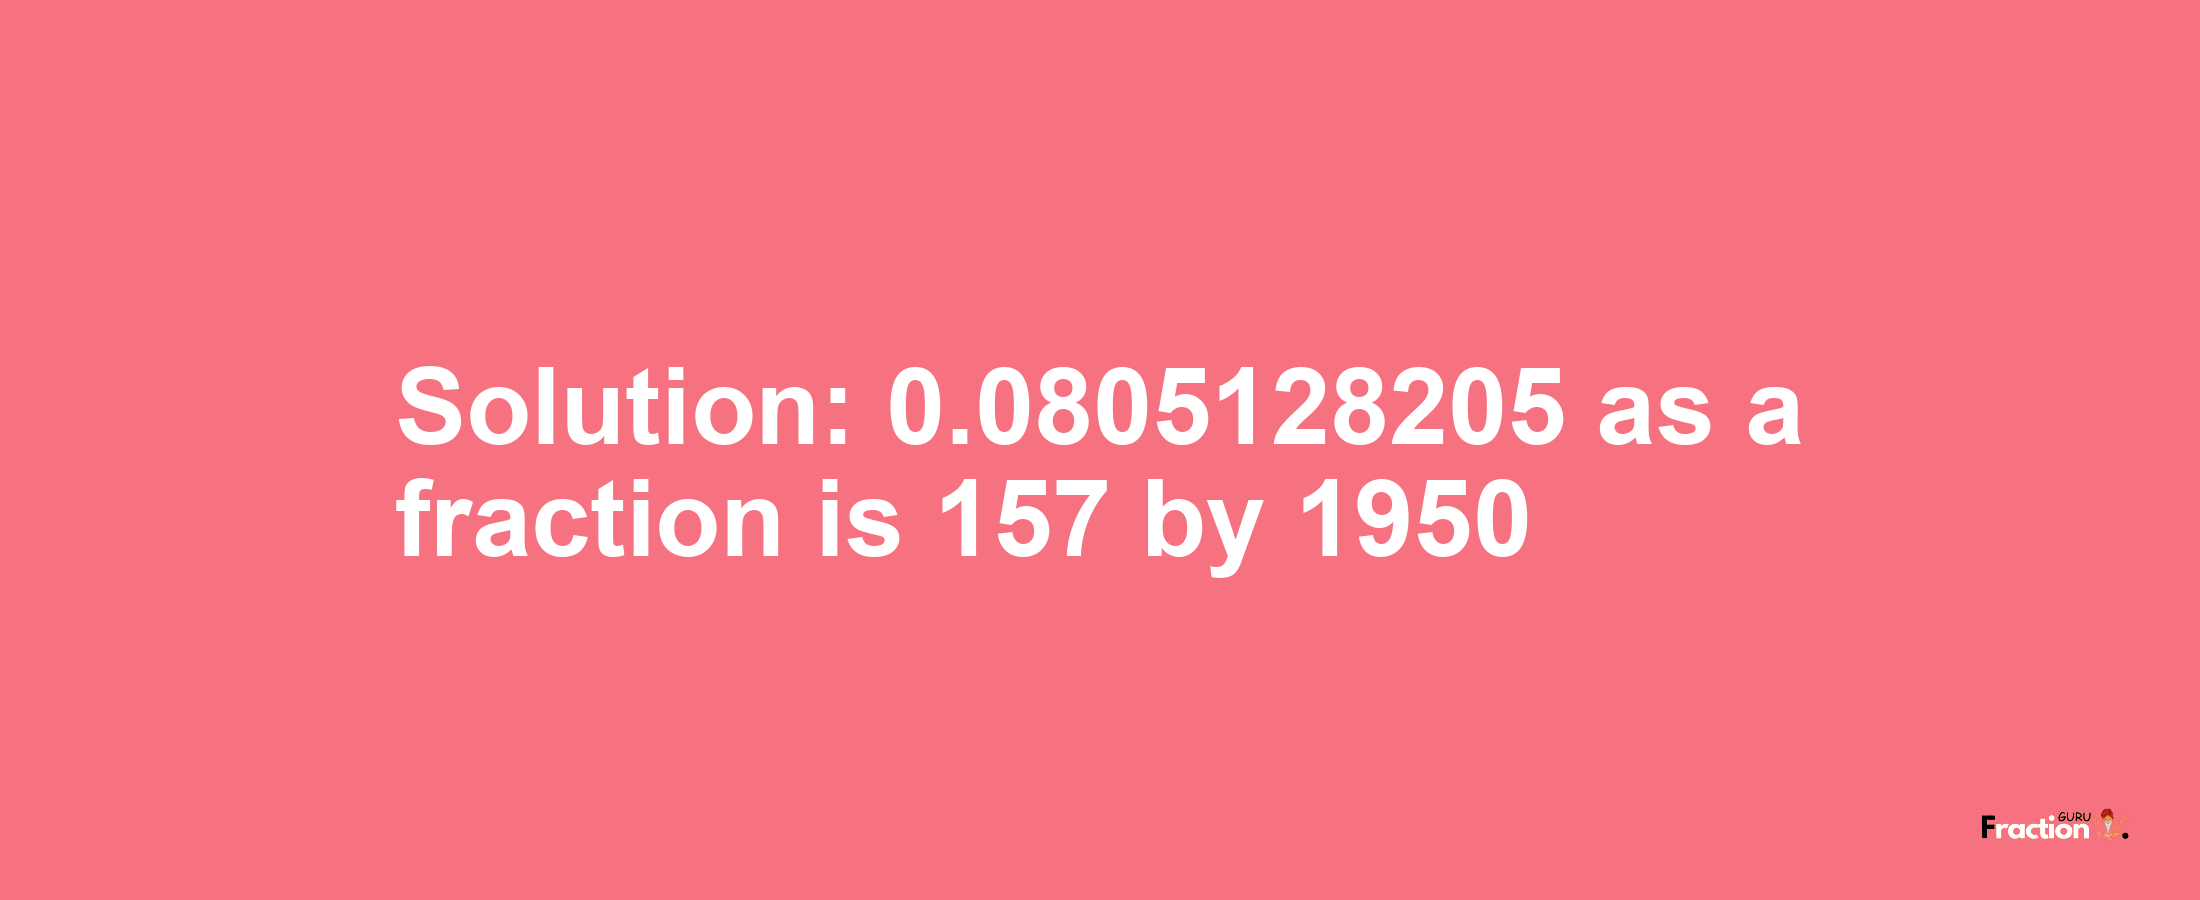 Solution:0.0805128205 as a fraction is 157/1950